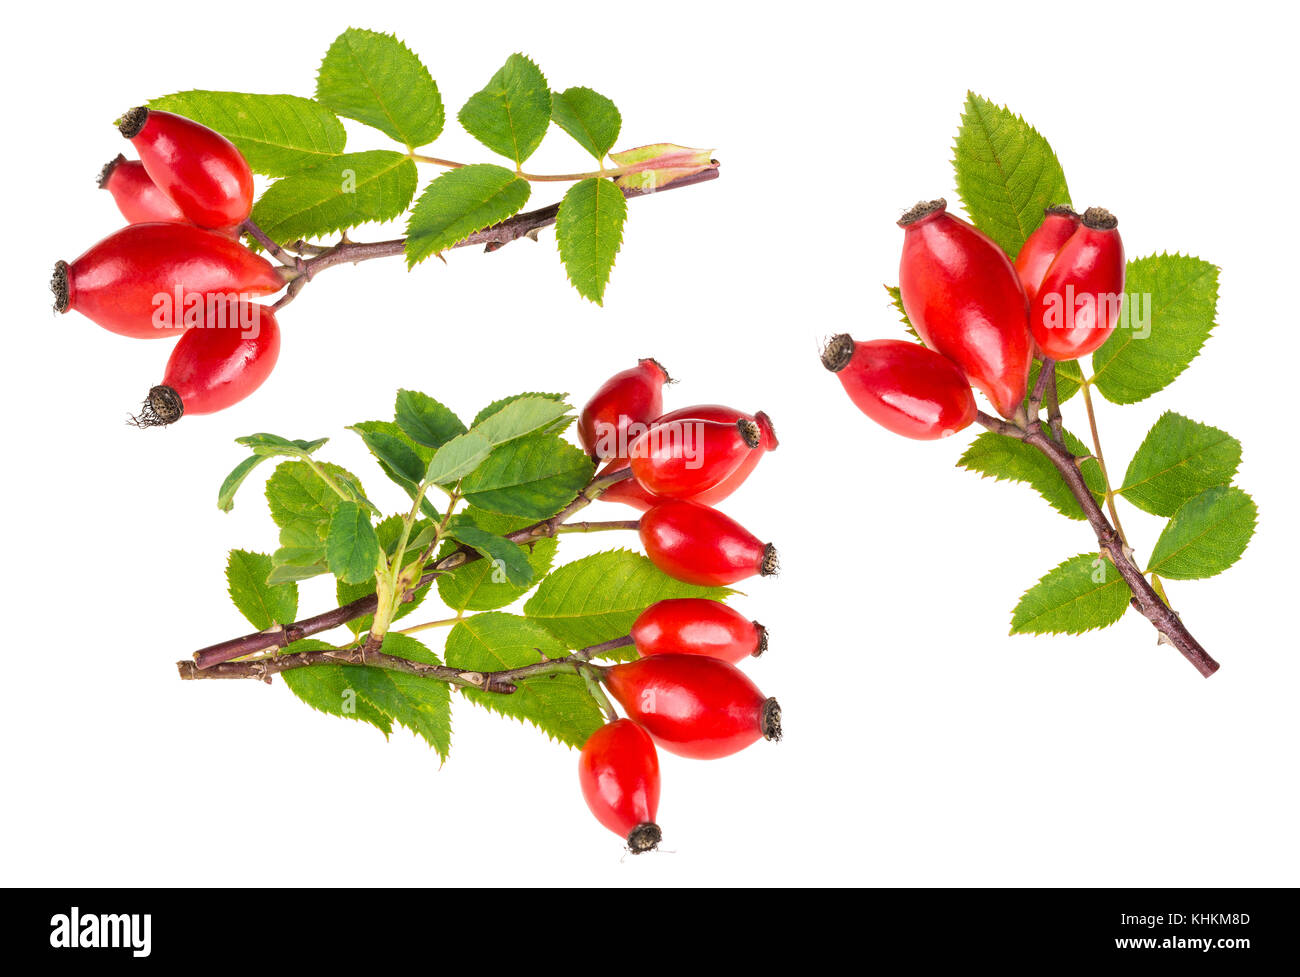 Small branches of wild rose with ripe briar fruits. Rosa canina. Group of decorative red rosehips with green leaves. Isolated on white background. Stock Photo